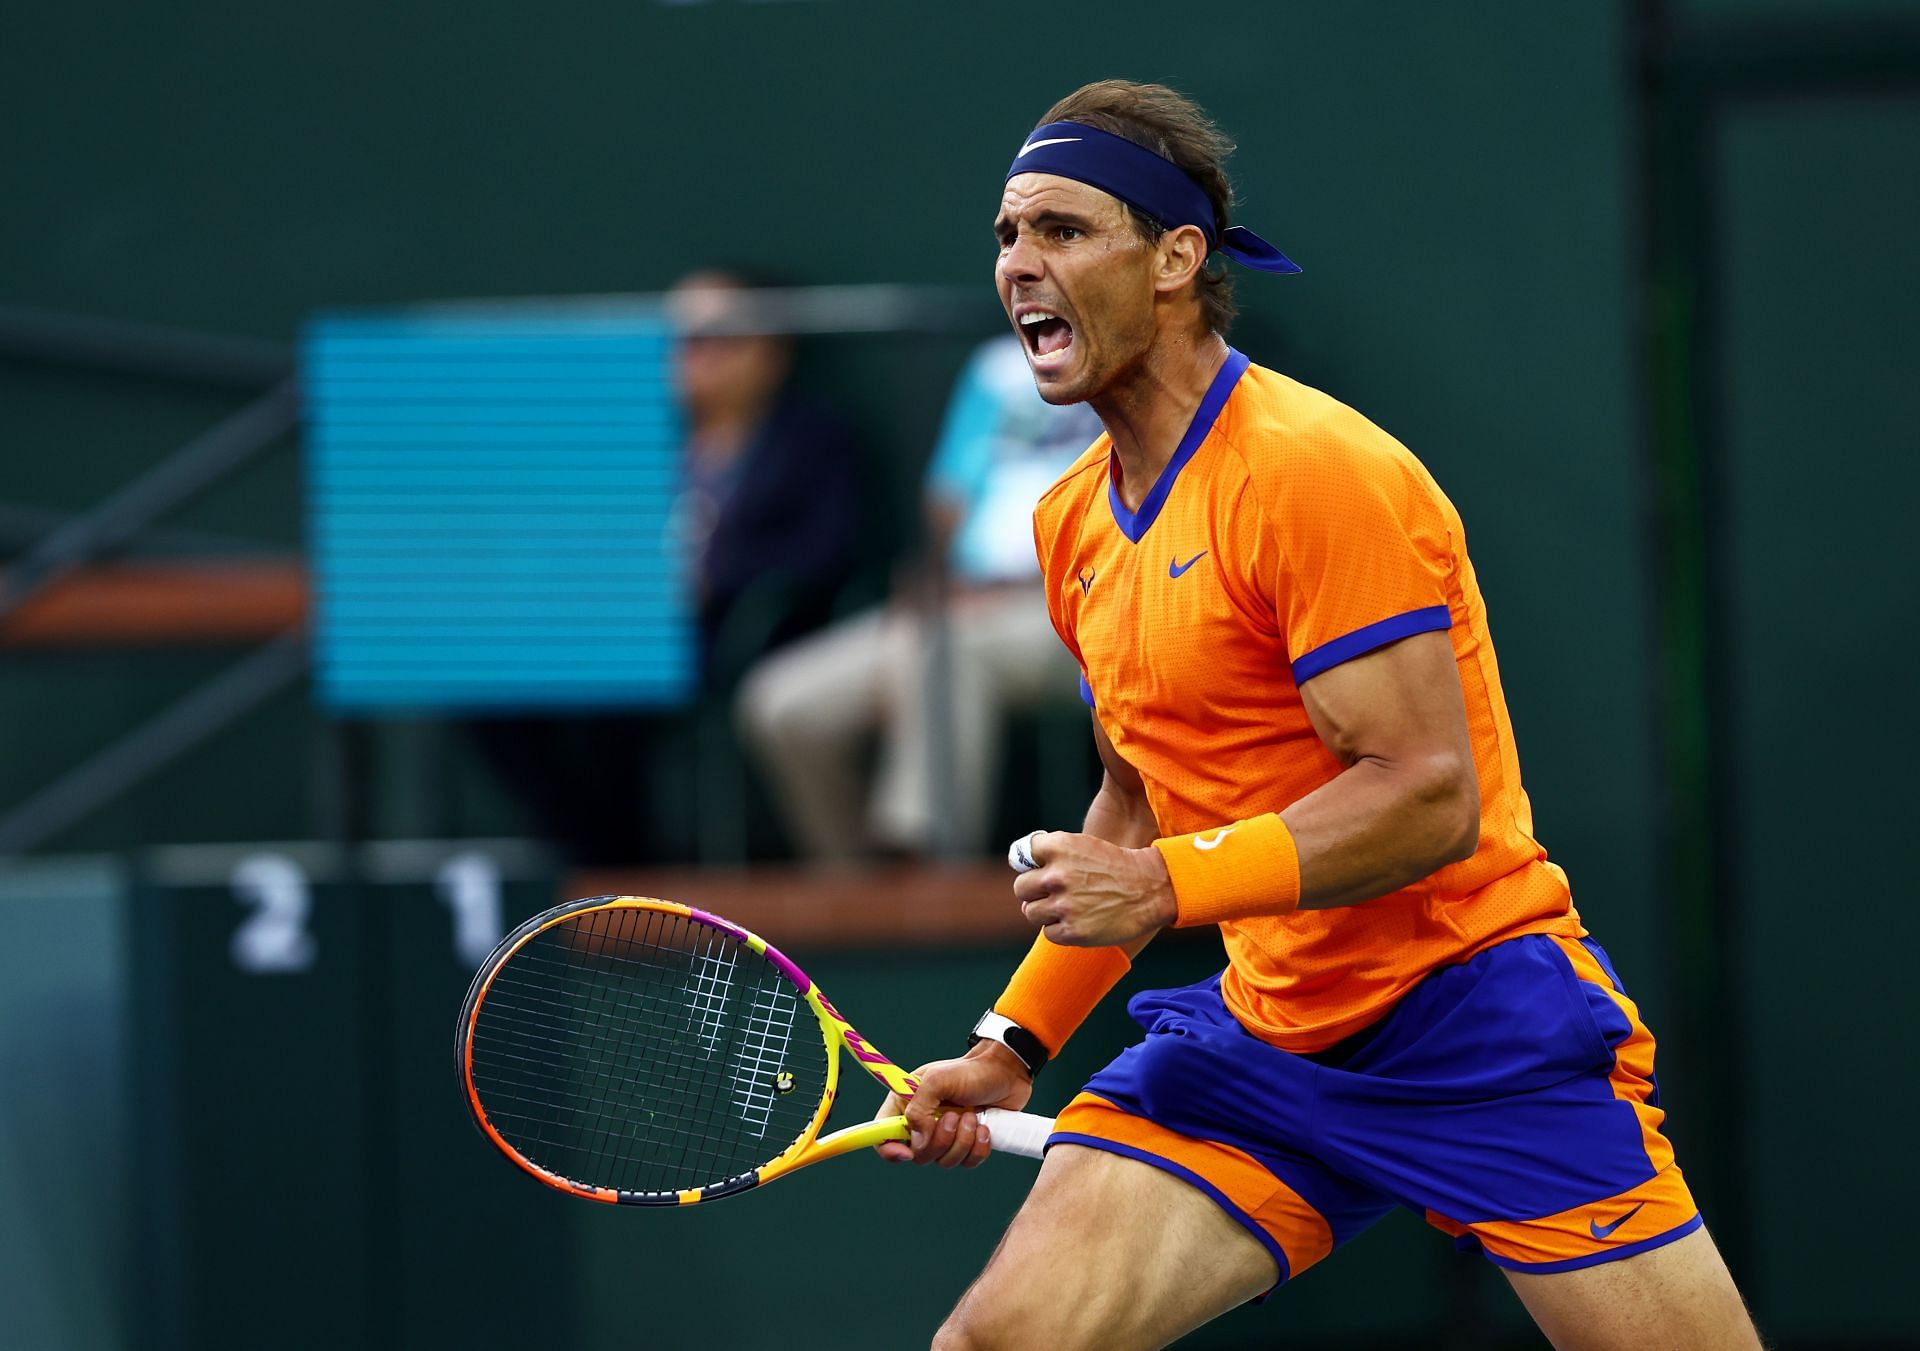 Rafael Nadal will look to wi his fourth Indian Wells title